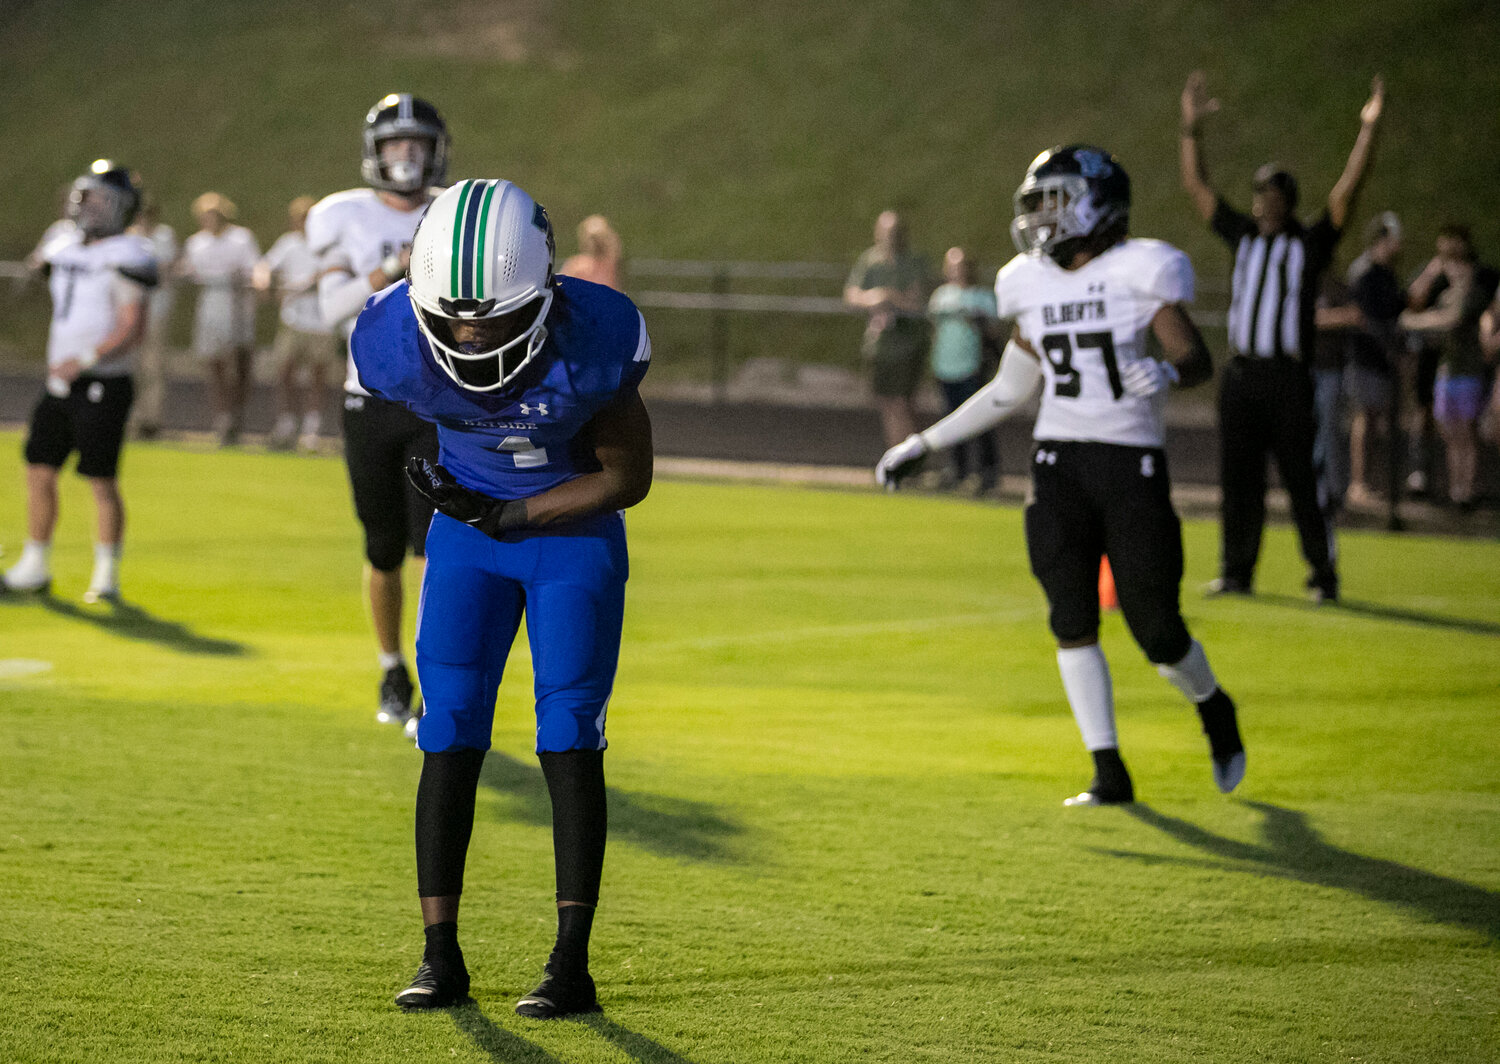 Damien Tate takes a bow after his first of two receiving touchdowns Friday night in Bayside Academy’s regular-season opener against the Elberta Warriors at Freedom Field. The 26-yard receiving score came early in the second quarter.